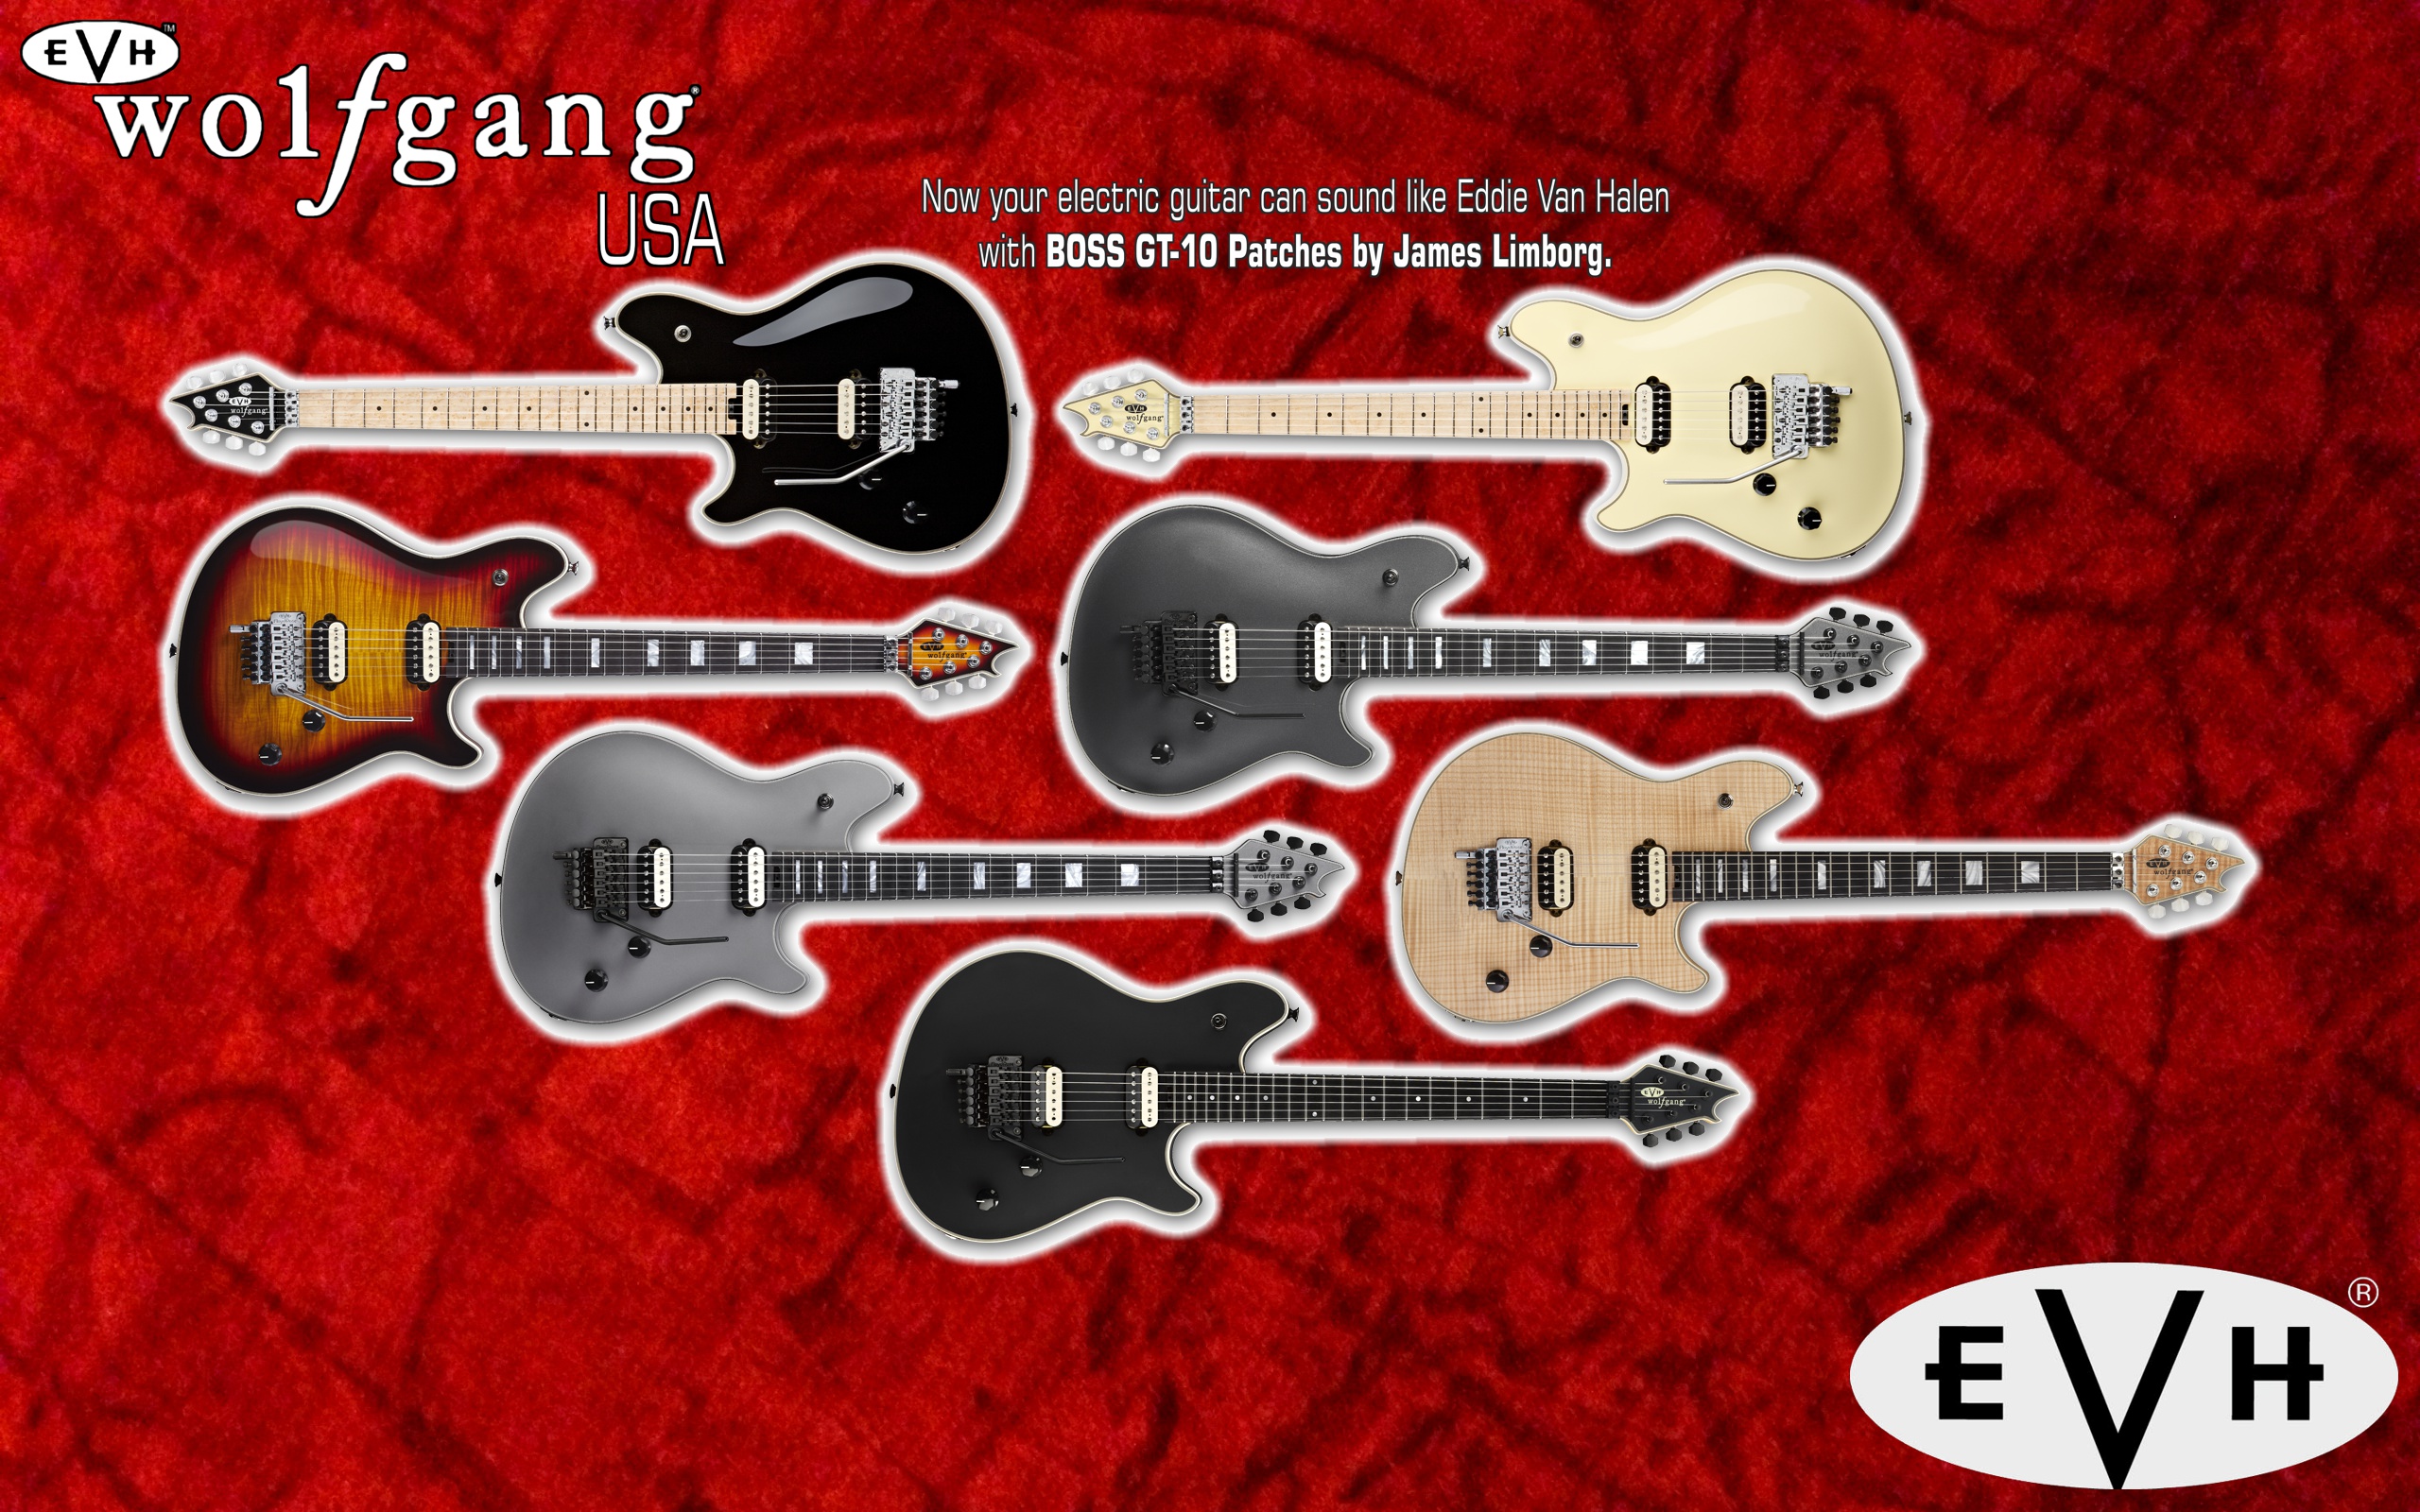 Evh Wolfgang Usa Colors Wallpaper Background